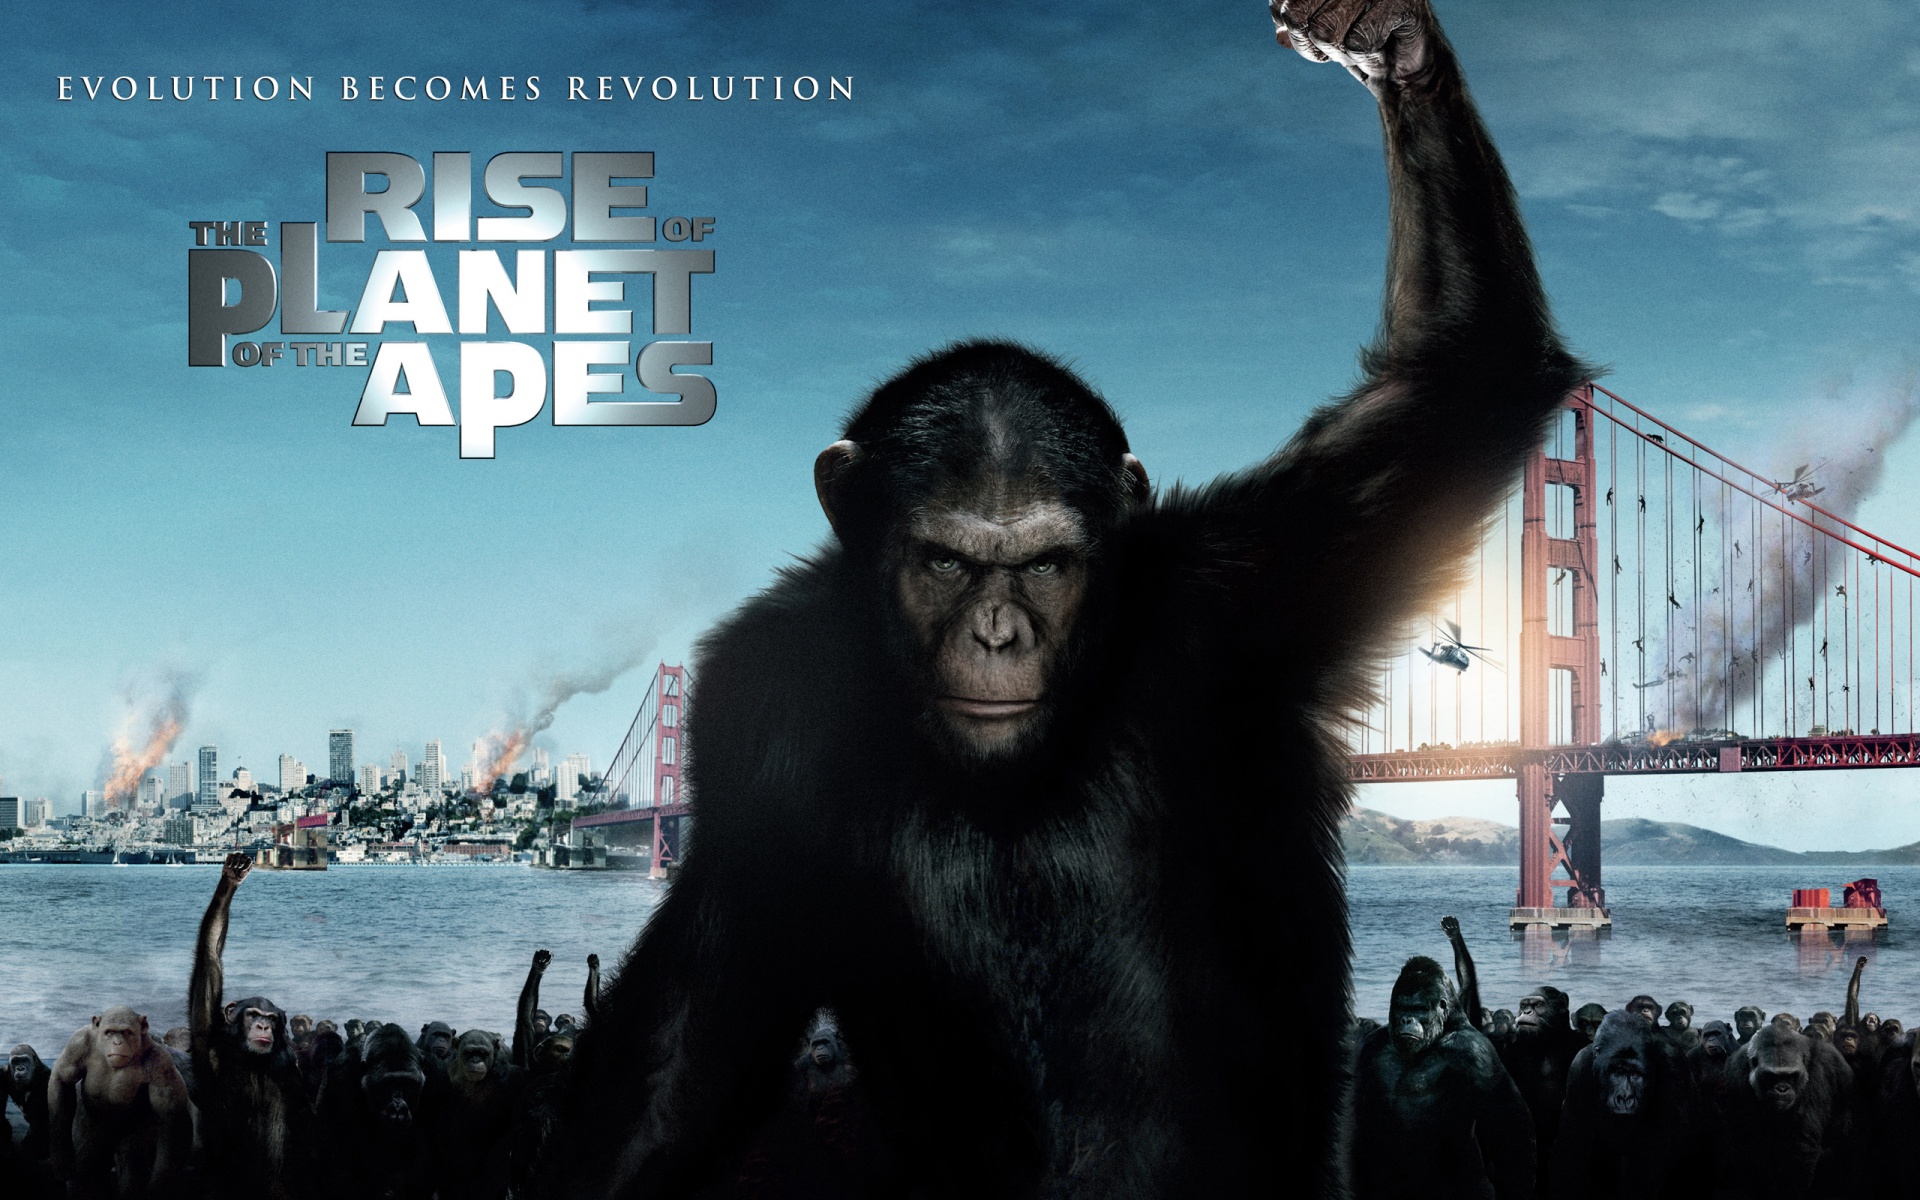 Rise of the planet of the apes movie poster.